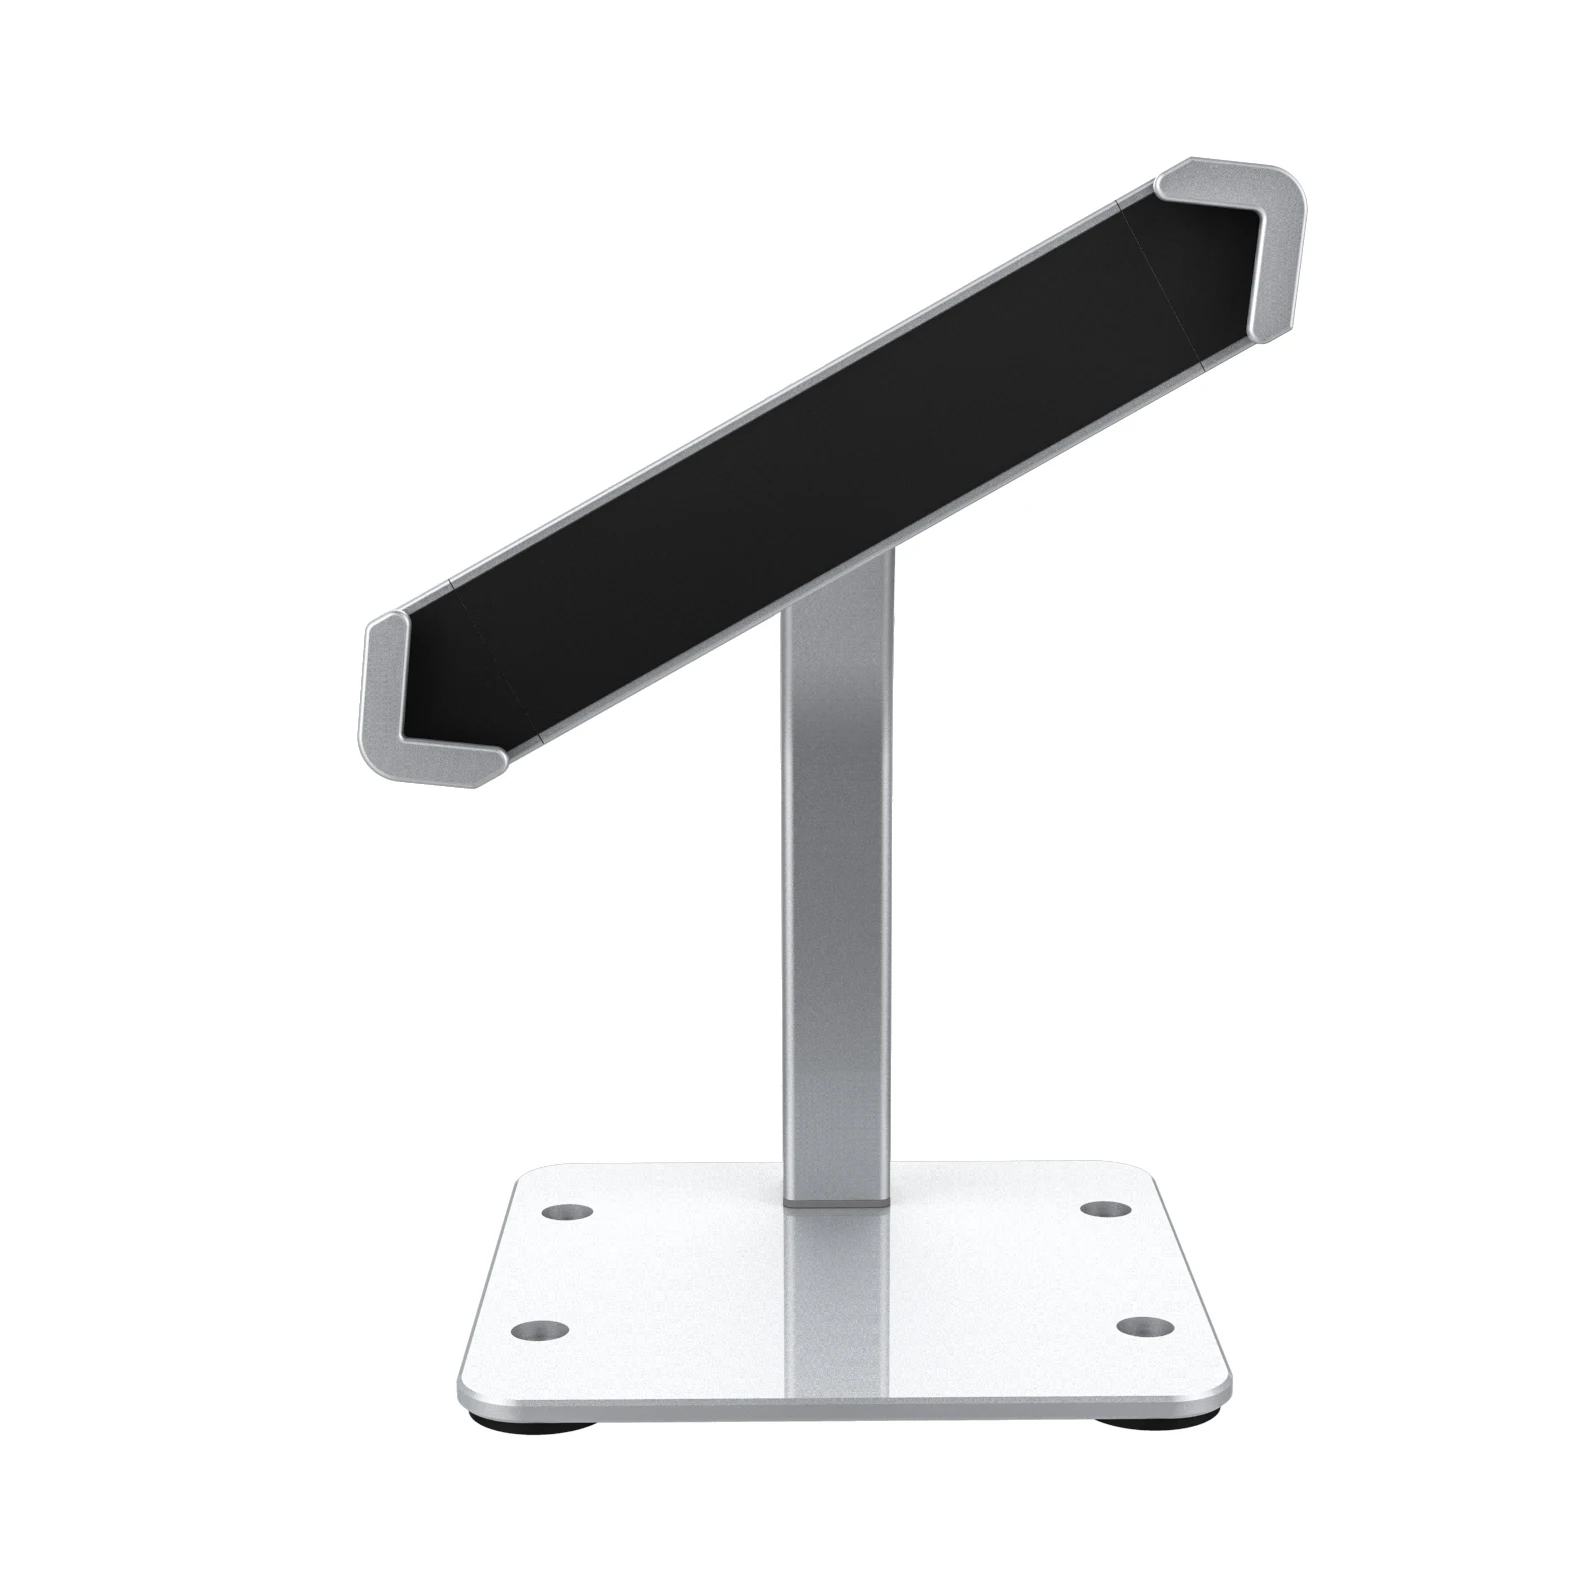 

Secure Universal Desk Tablet PC Holder Aluminum Security Anti-Theft Desktop Tablet Stand With Lock for Ipad